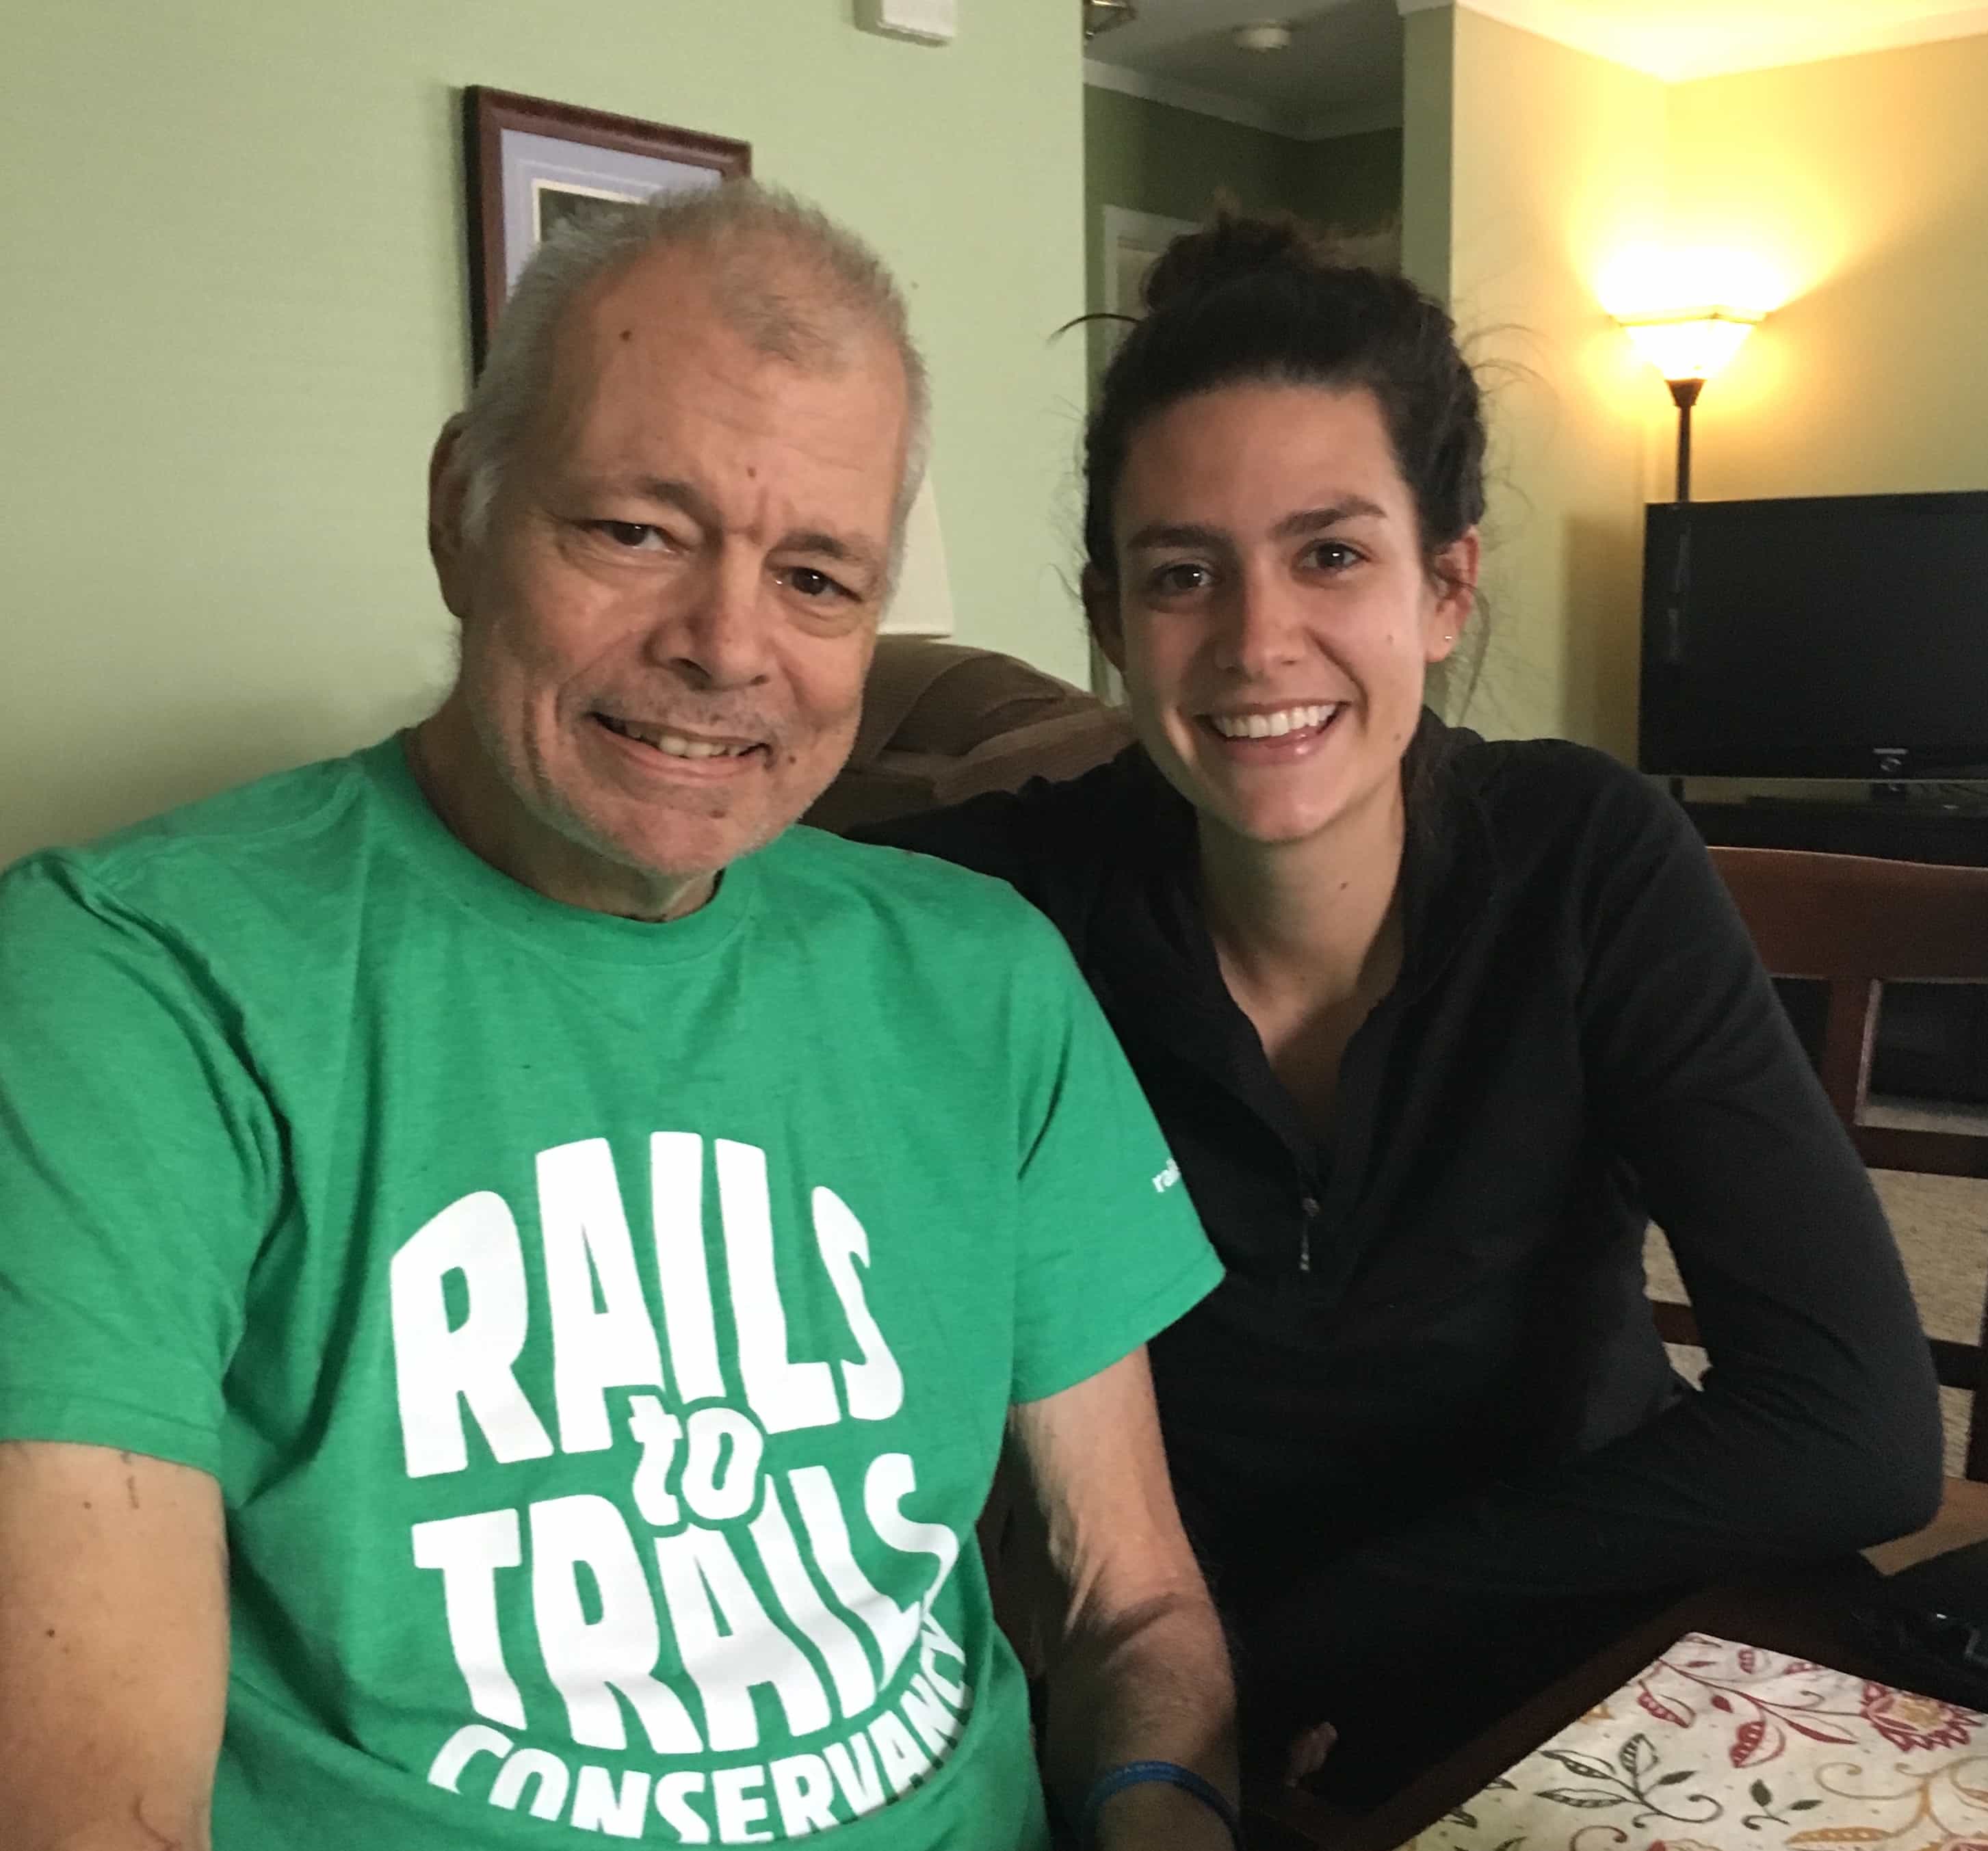 Laura Allen and her father Tom, after Laura donated her kidney to her father.